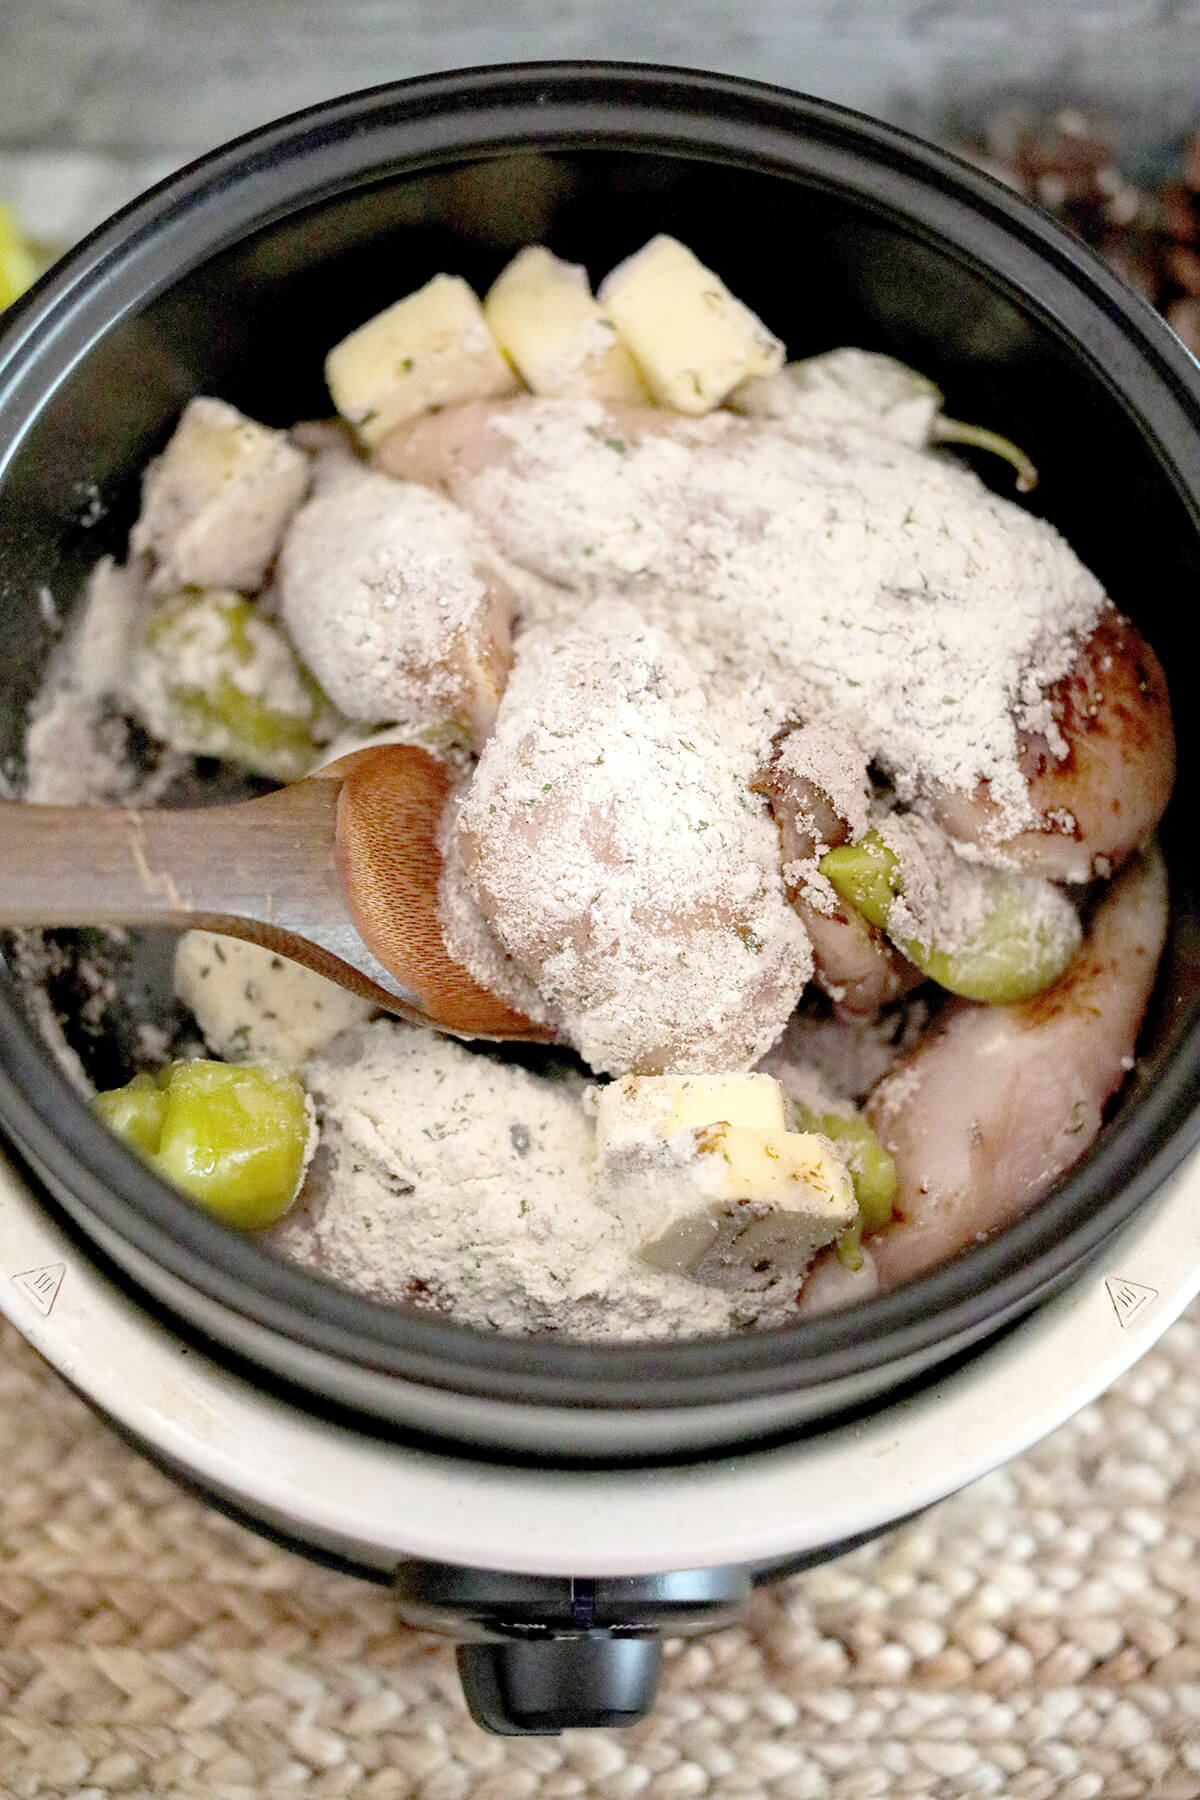 All remaining ingredients added on top of chicken breasts in a slow cooker.